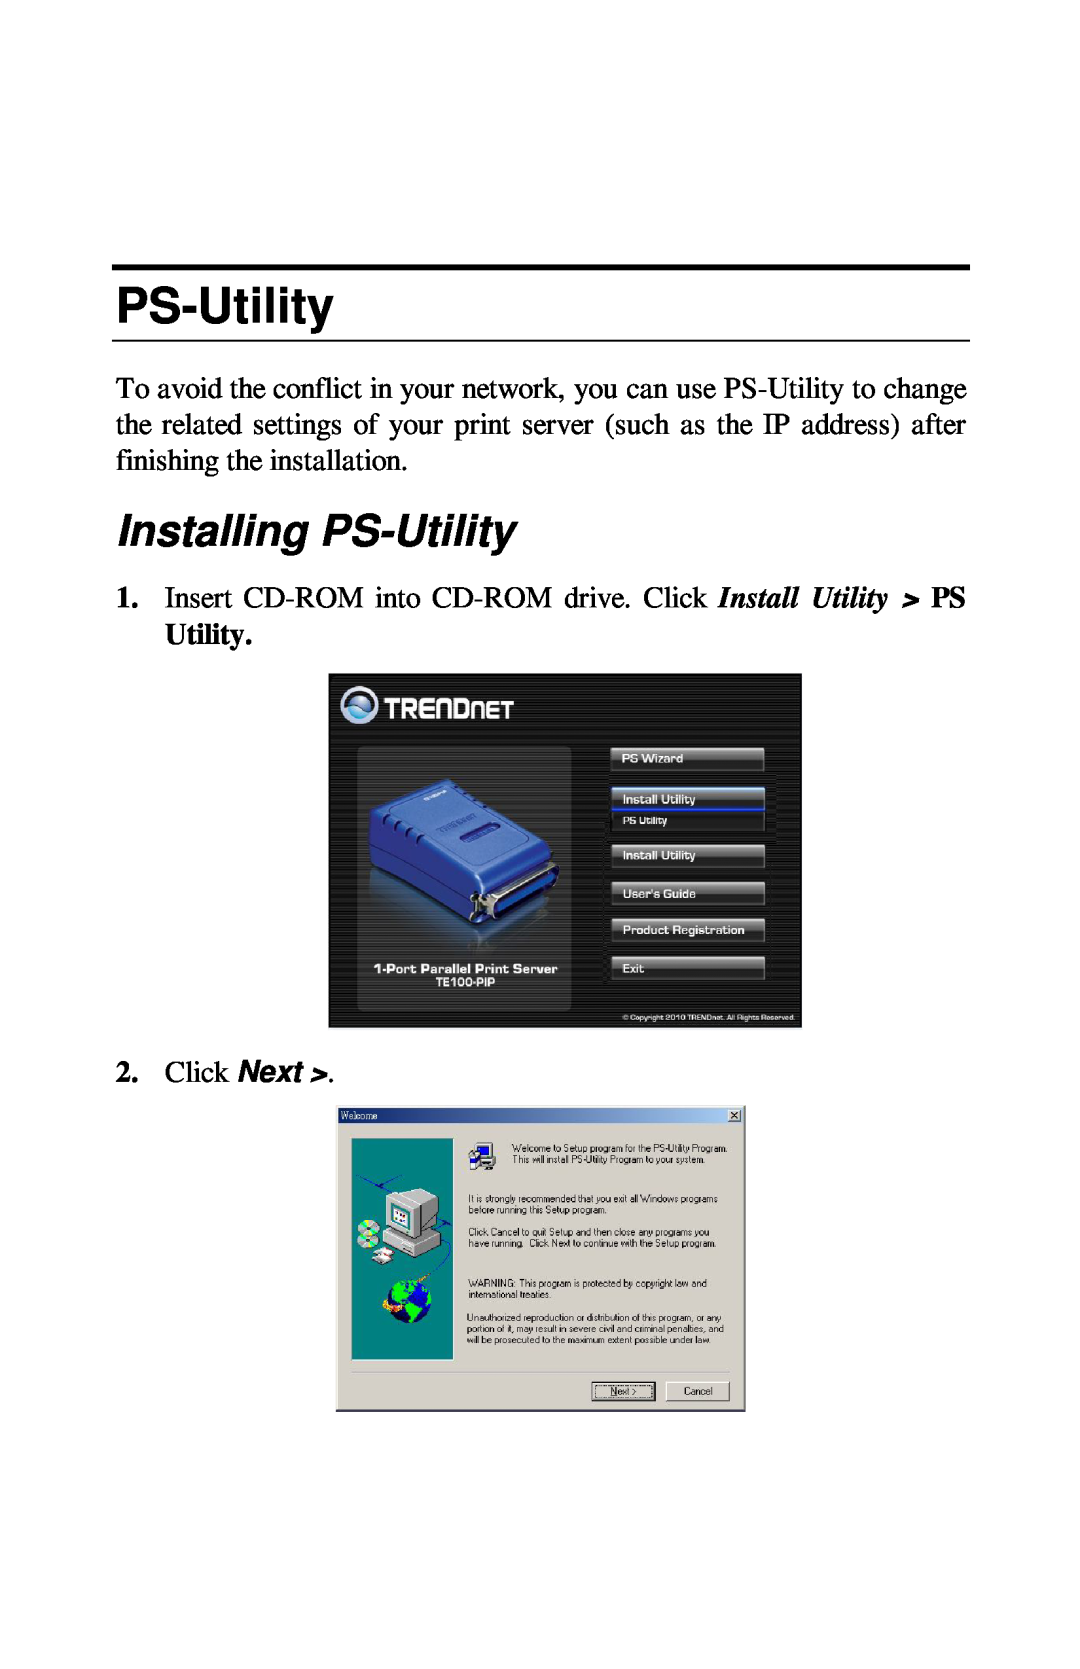 TRENDnet TE100-PIP manual Installing PS-Utility, Insert CD-ROM into CD-ROM drive. Click Install Utility PS, Click Next 